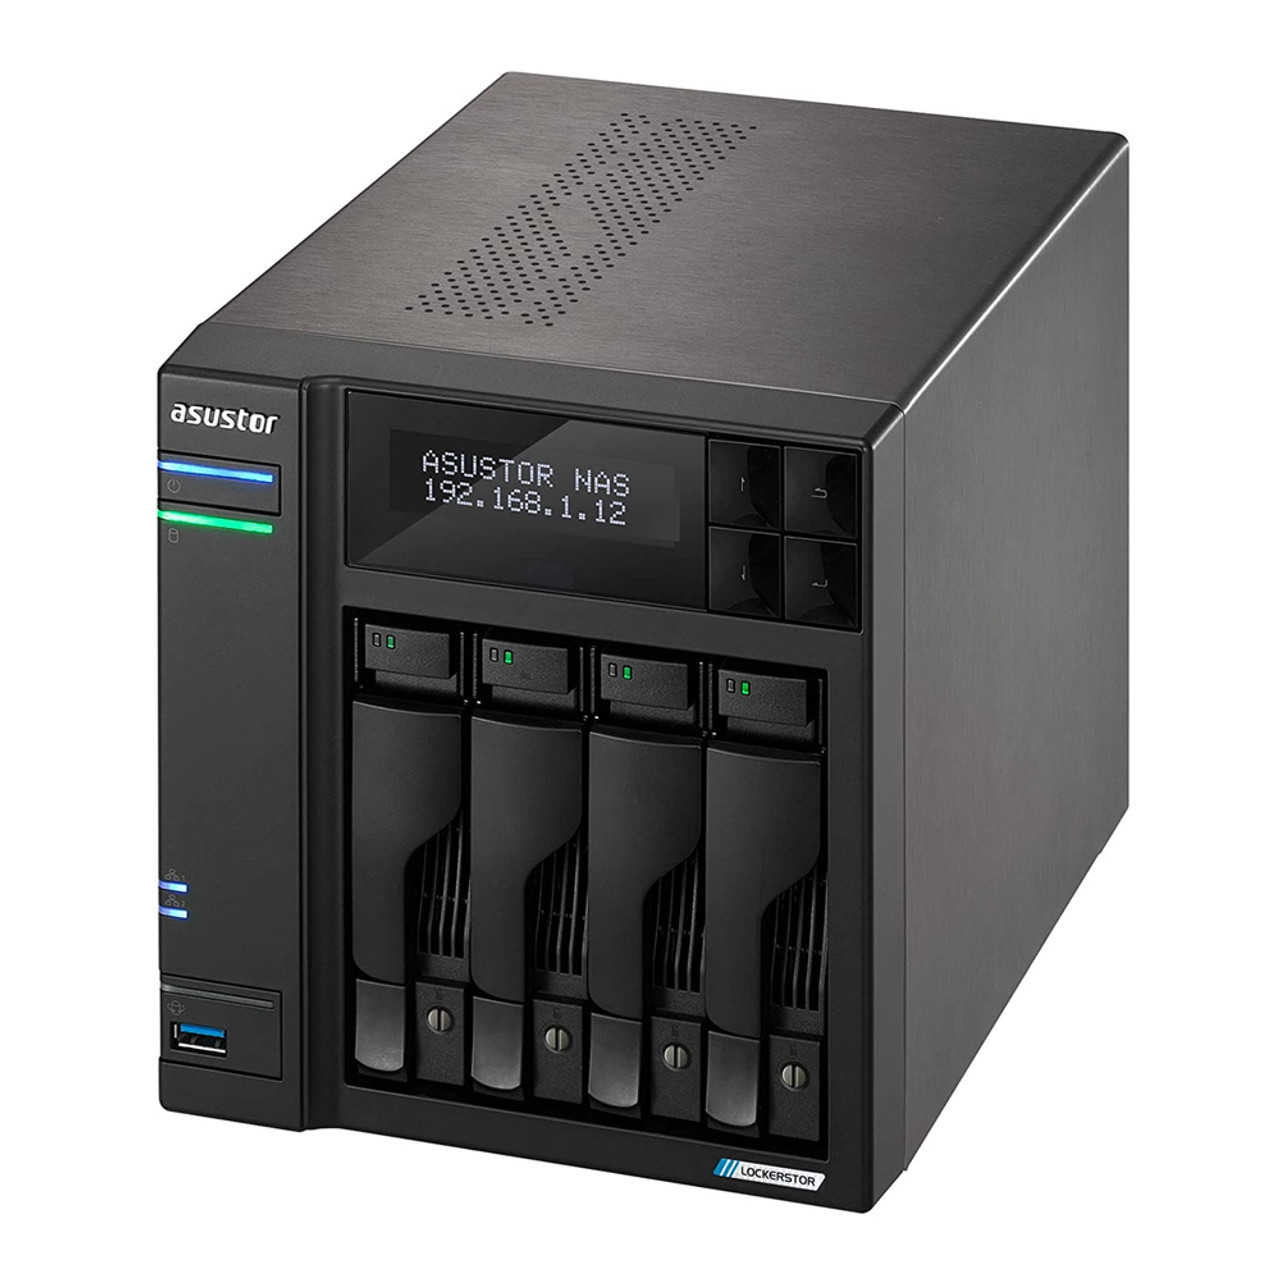 Asustor AS6704T Lockerstor 4 Gen2,4Bay NAS,Quad-Core 2.0GHz CPU,Dual 2.5GbE Ports,4GB DDR4,Four M.2 SSD Slots (Diskless)